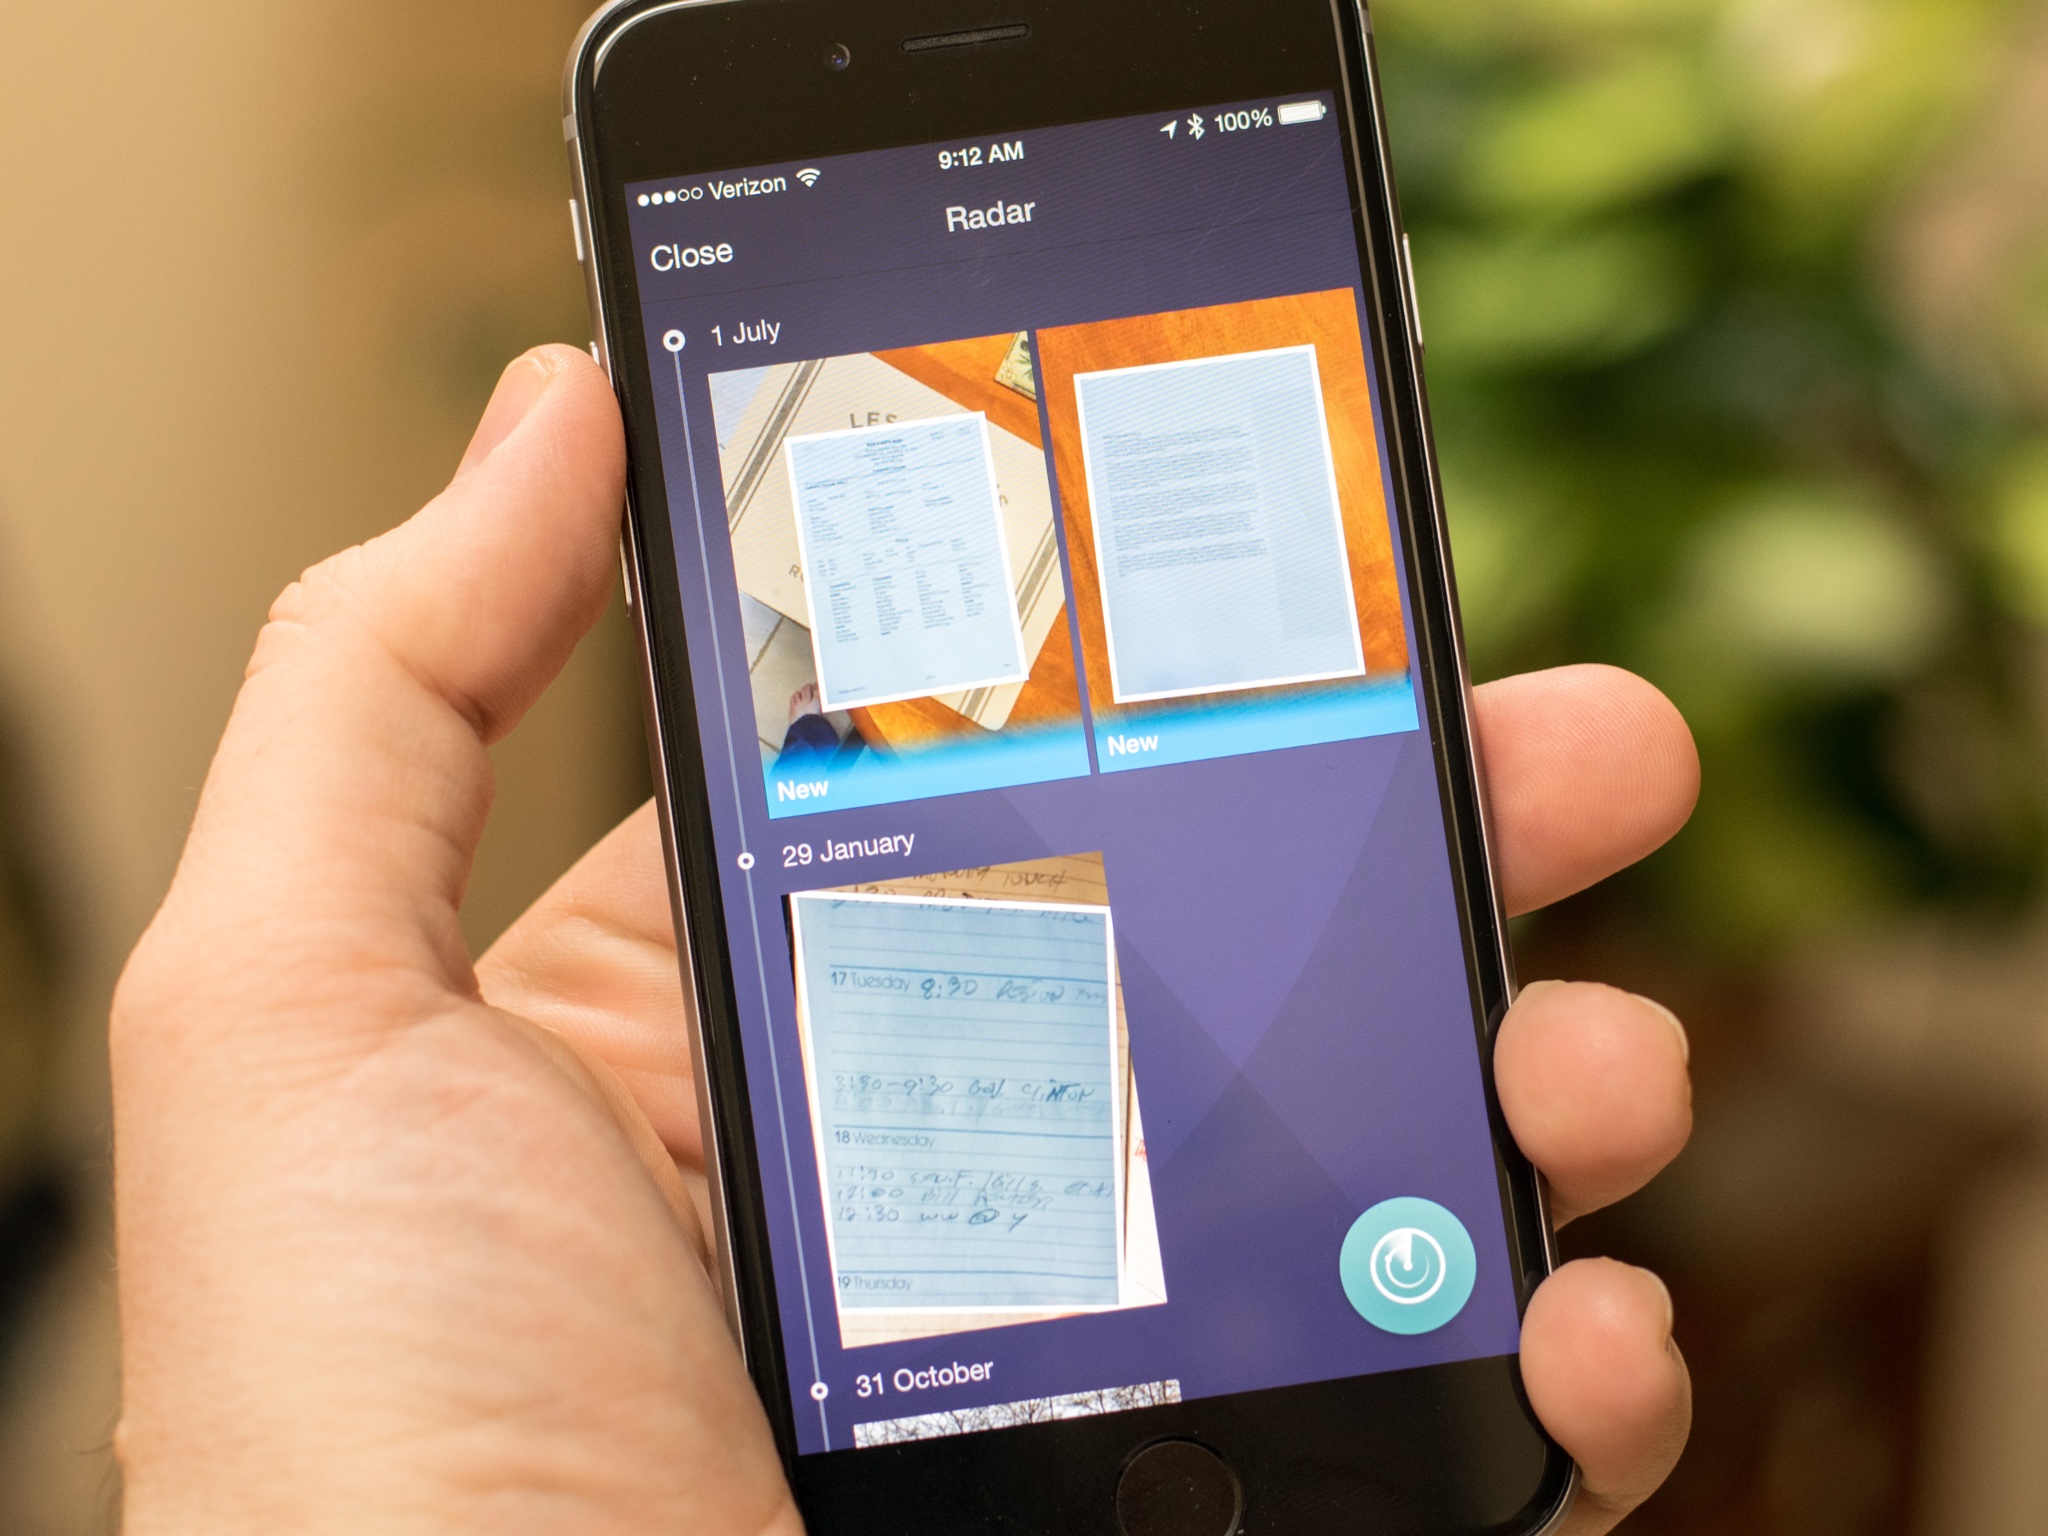 Scanner Pro adds text recognition, distortion correction, and workflows